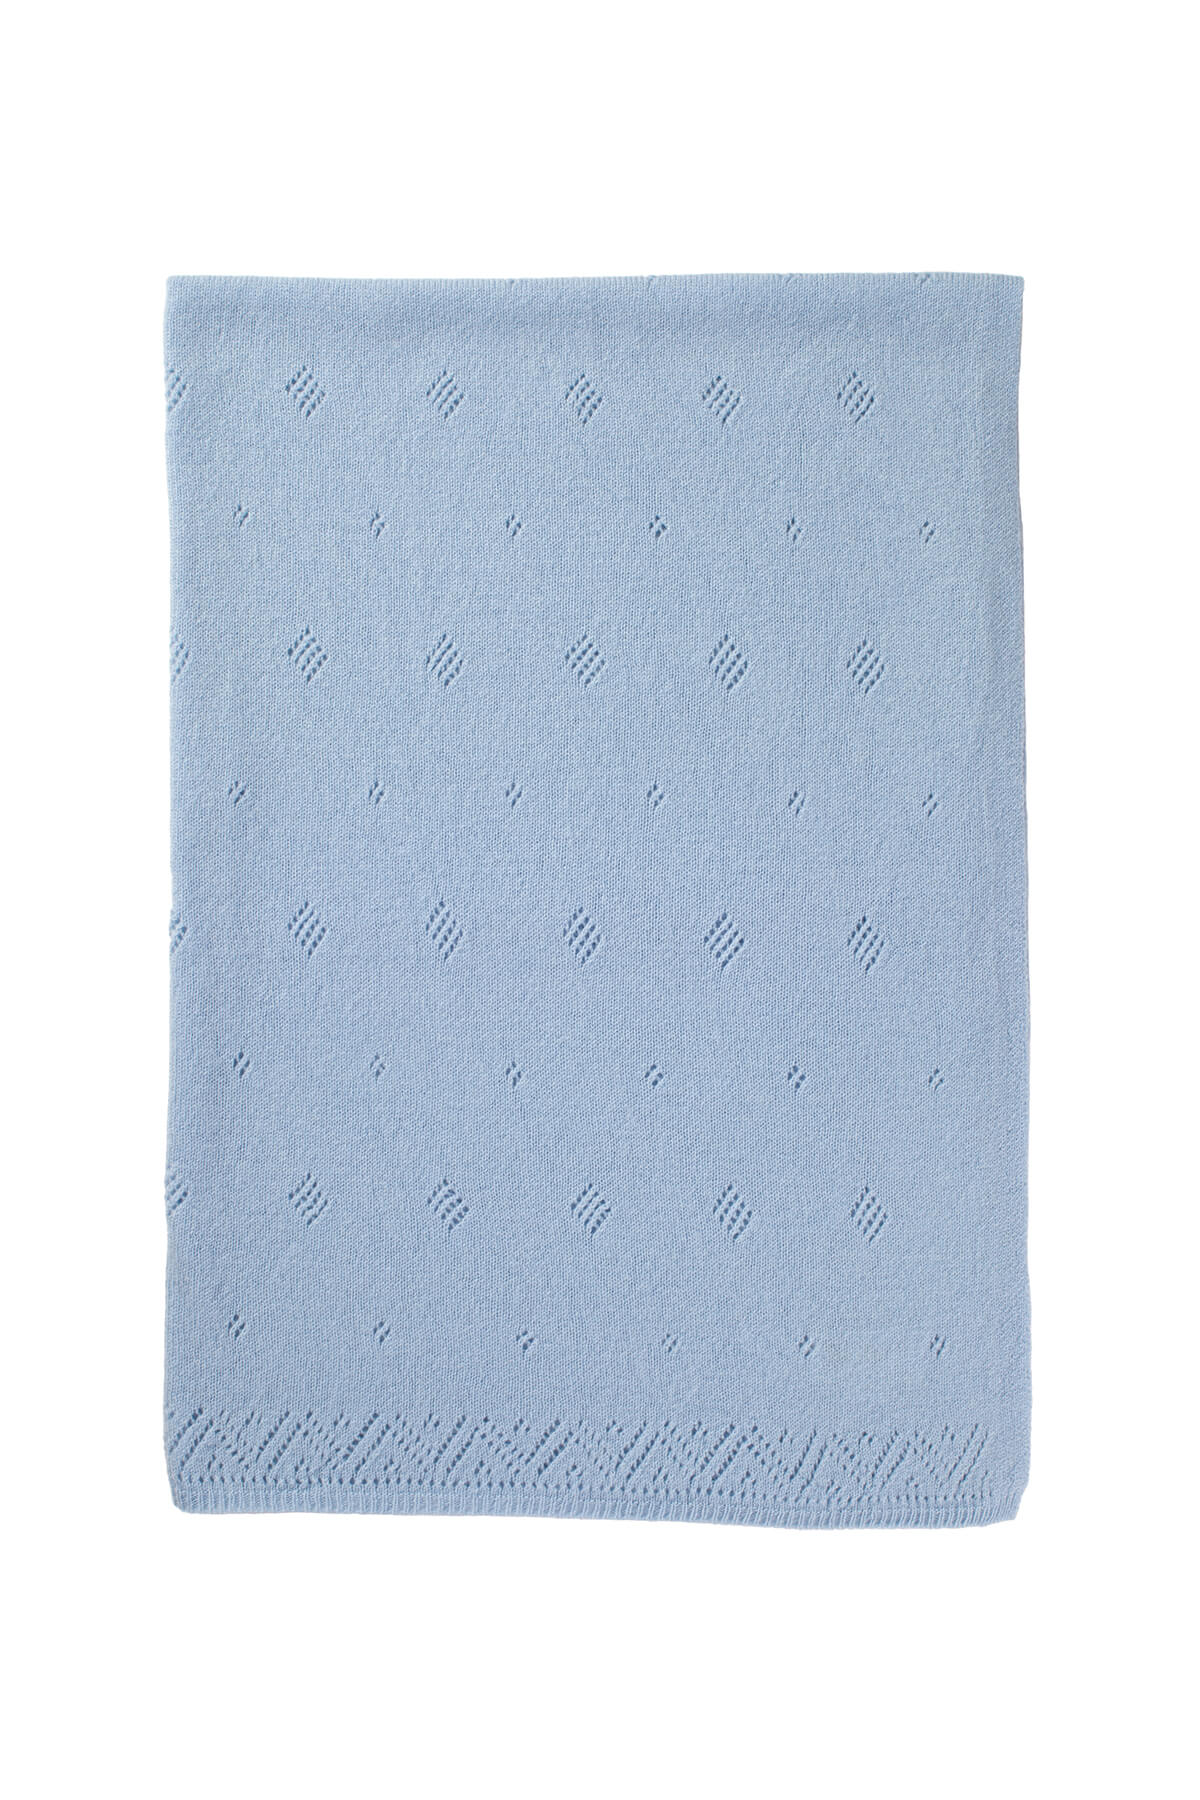 Johnstons of Elgin Gauzy Knit Cashmere Baby Blanket with Pointelle Details in Powder Blue on white background HAA01904SD0167ONE